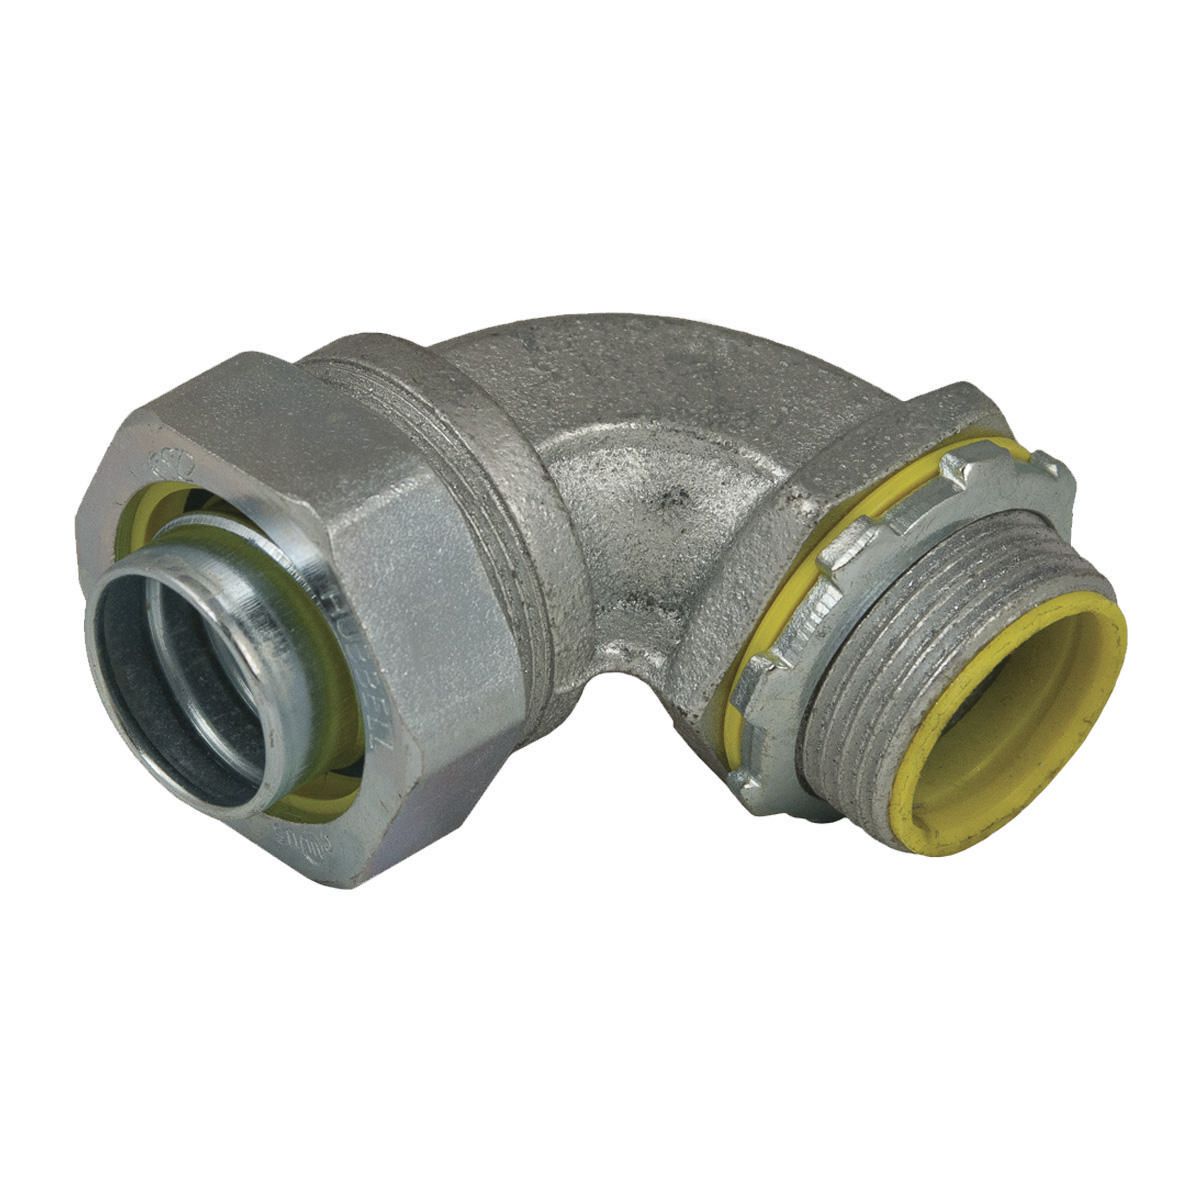 | in. Degree 3544-8 Liquidtight Raco 90 | 1 Connector, Insulated